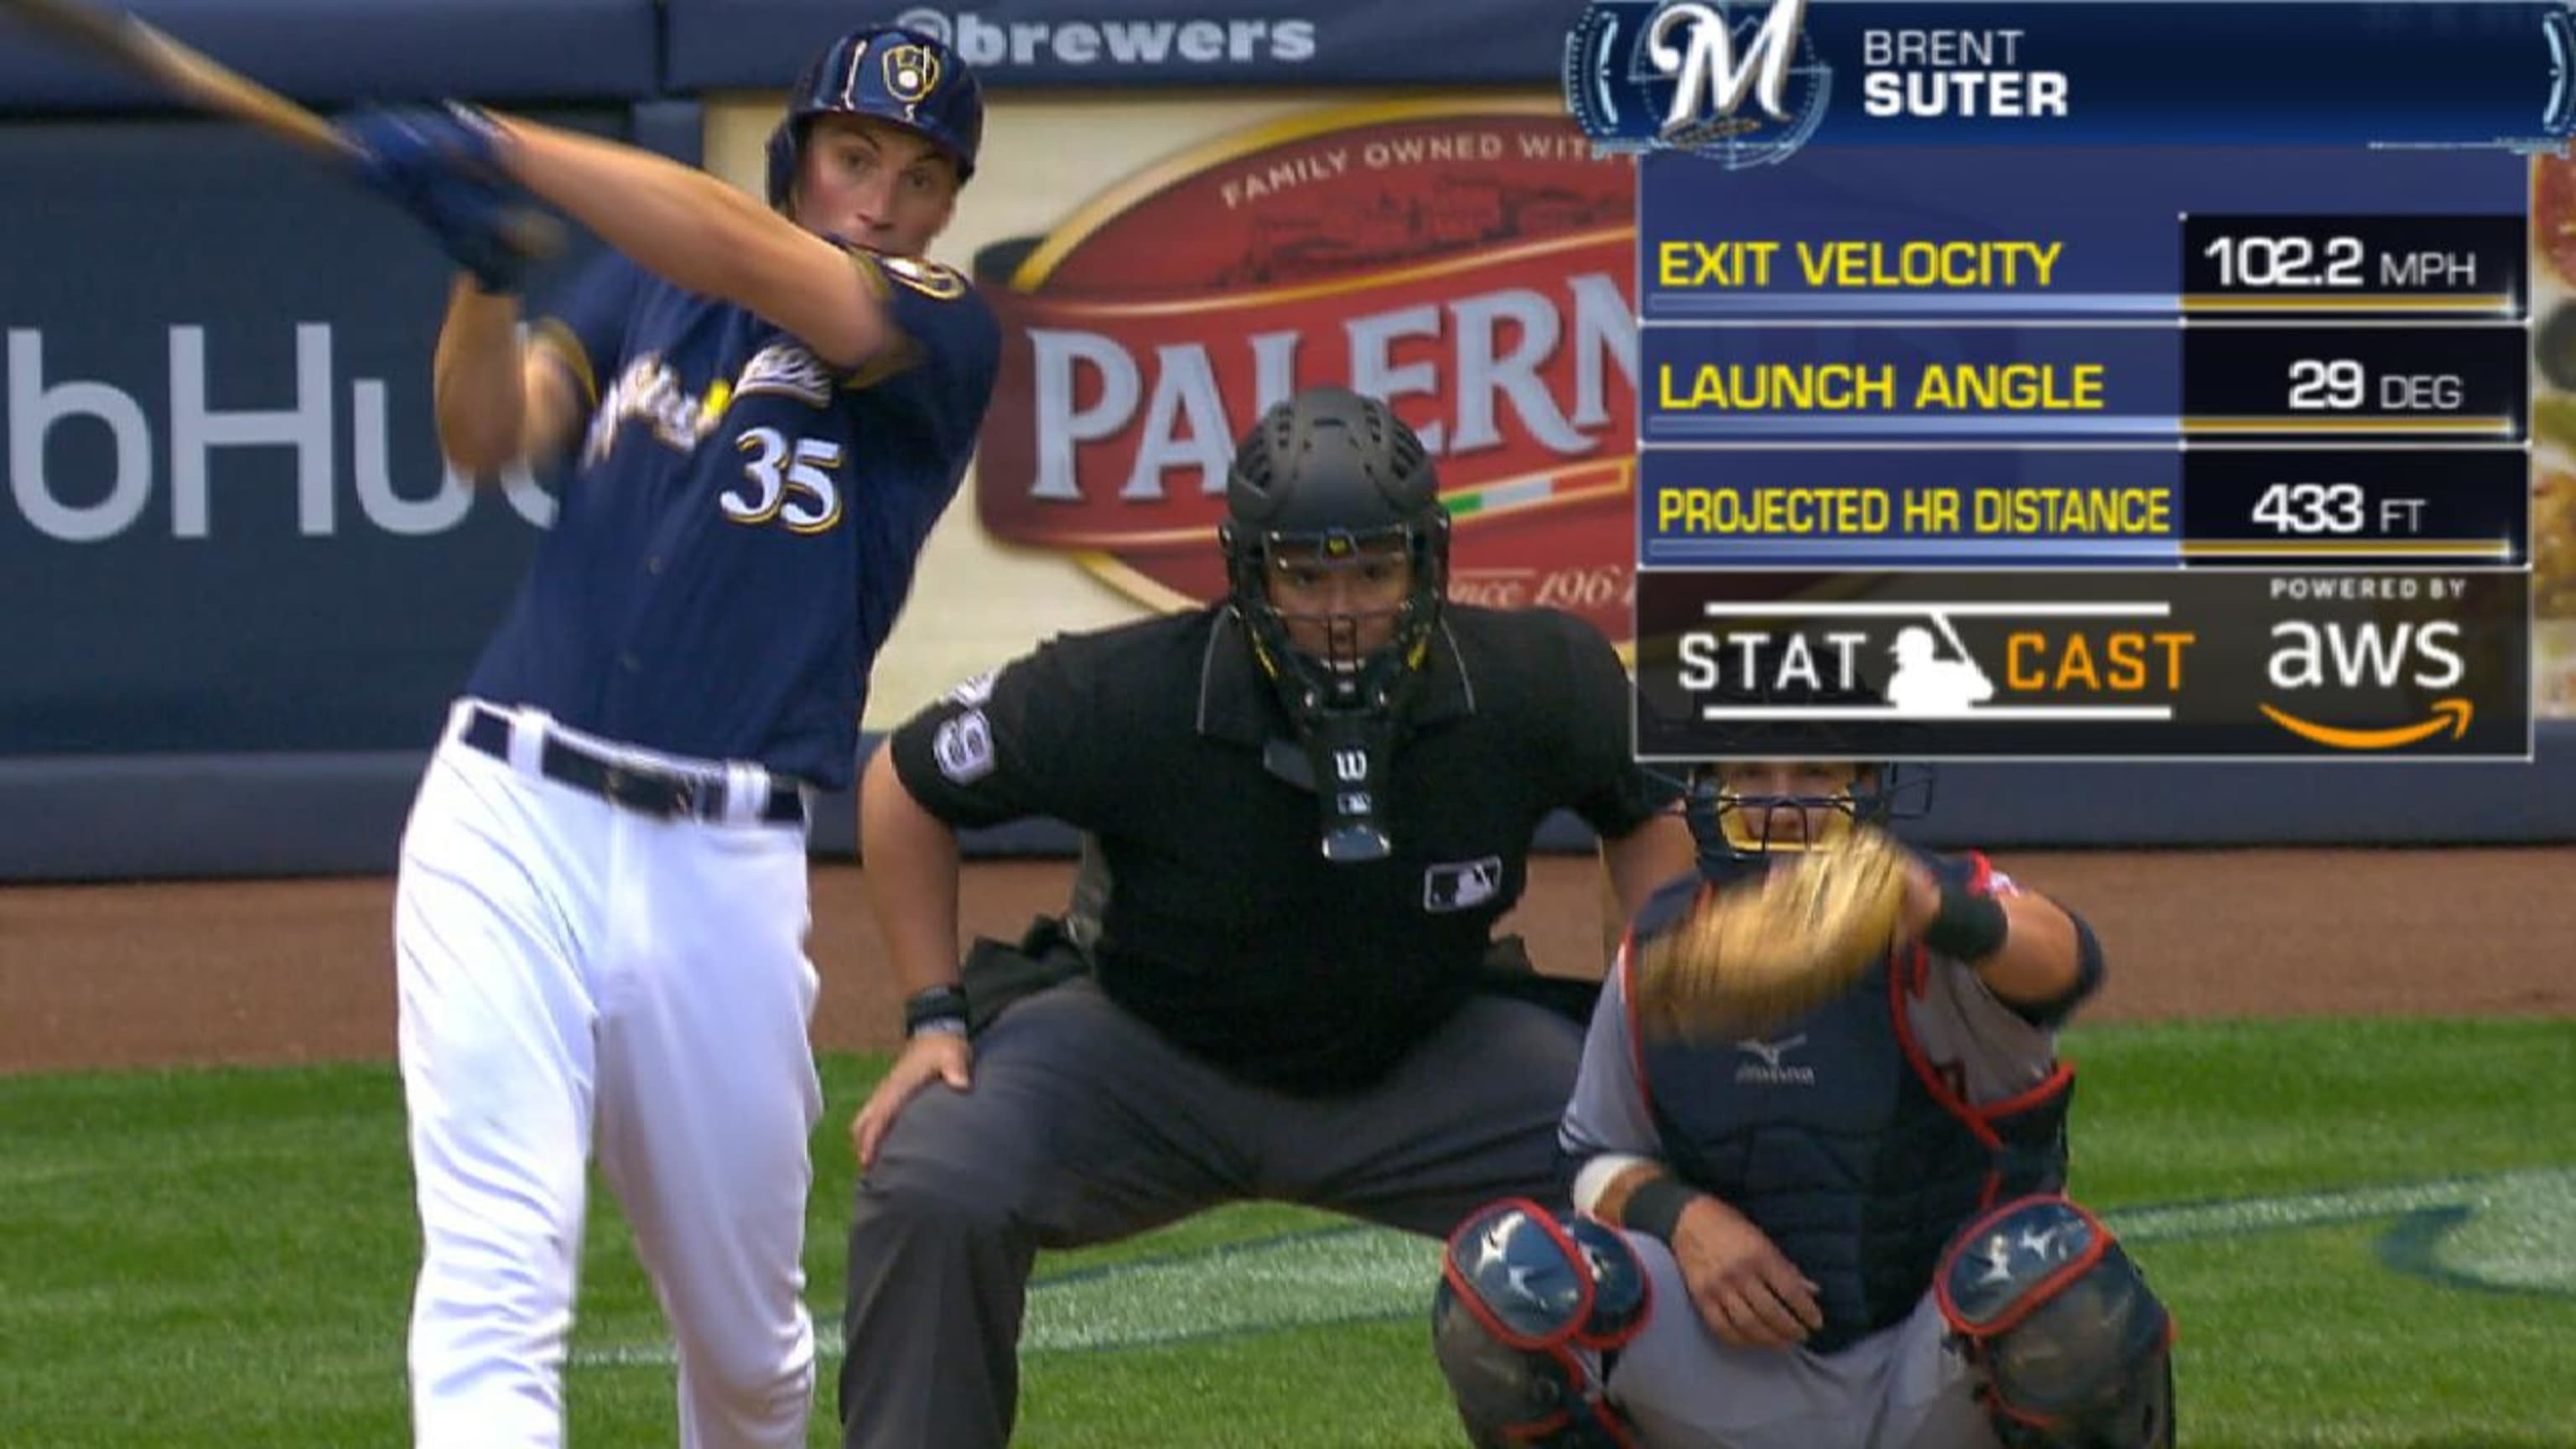 Brewers' Craig Counsell makes call to bullpen for 'Raptor' Brent Suter